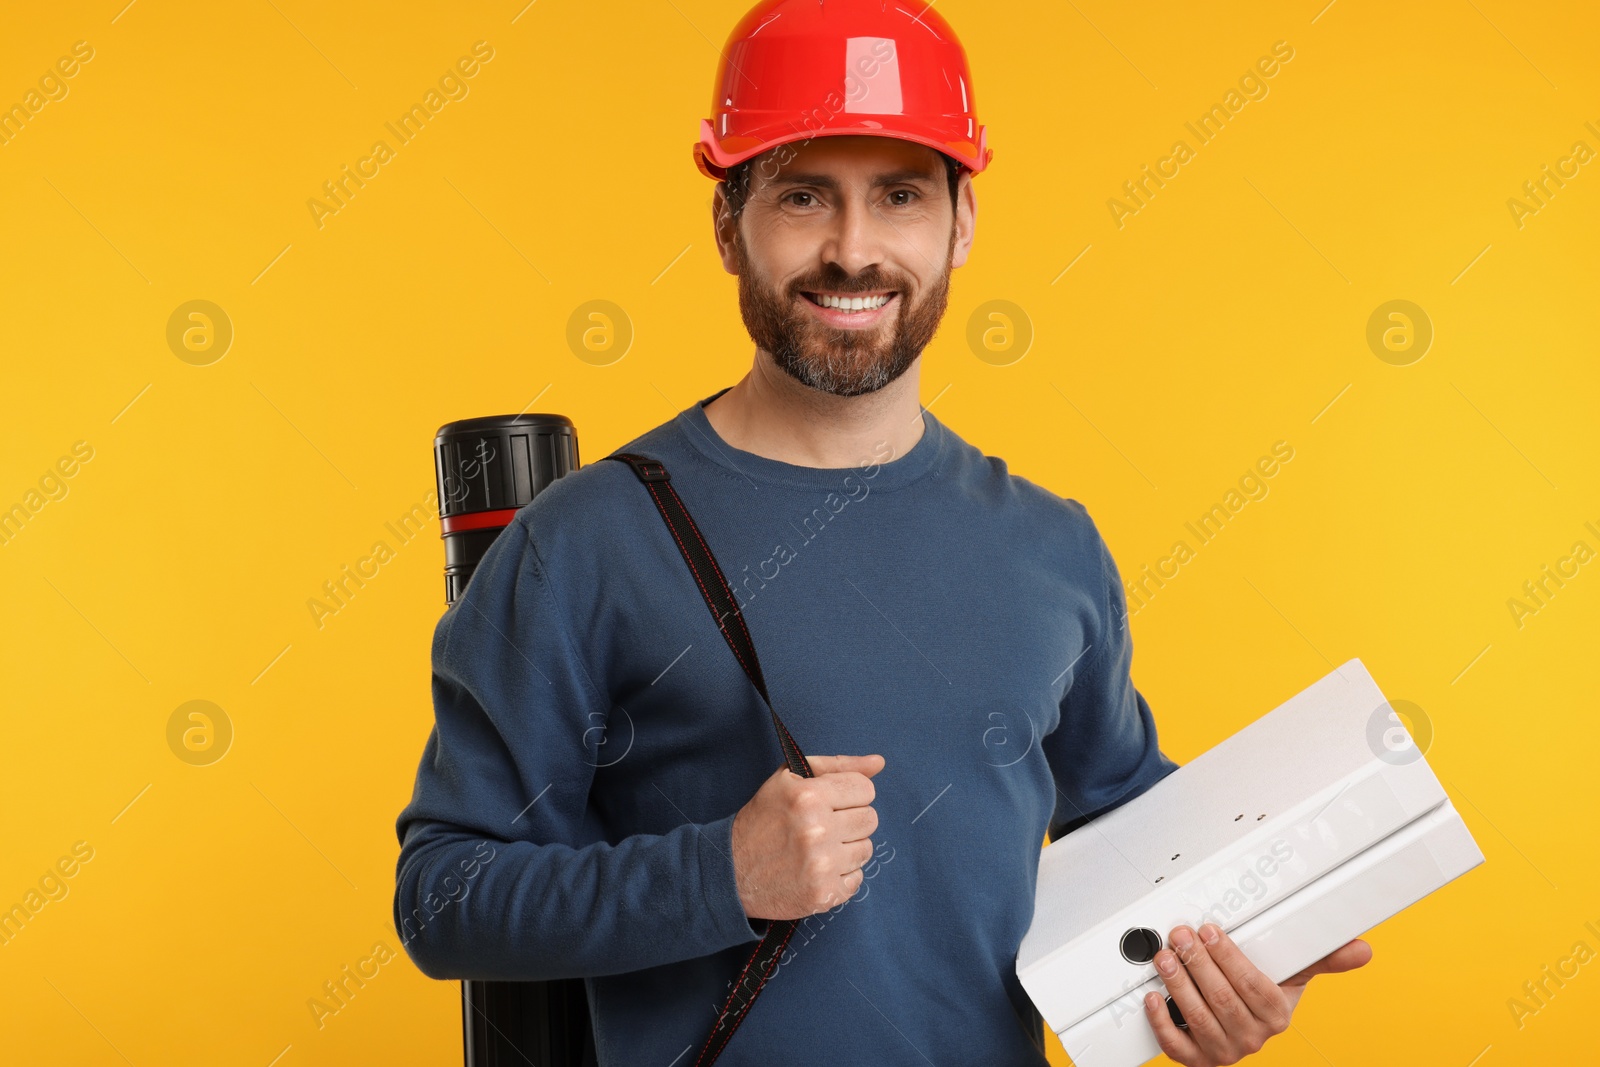 Photo of Architect in hard hat with drawing tube and folders on orange background